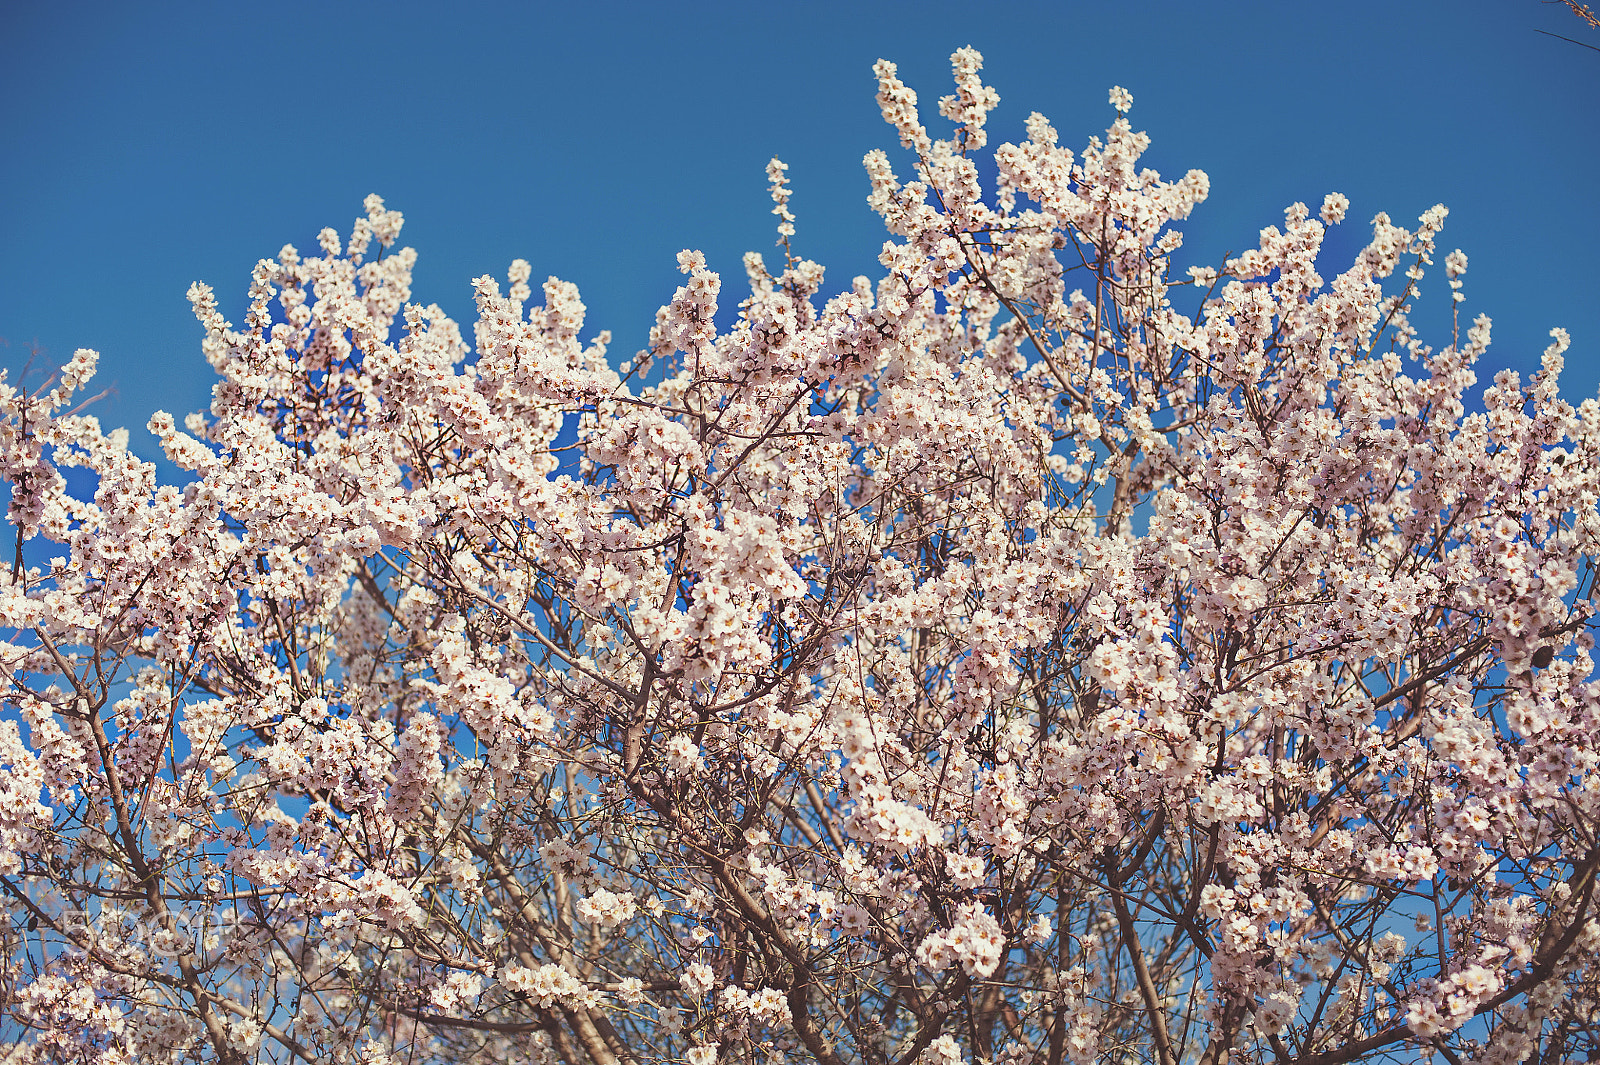 Nikon D700 sample photo. Tree in bloom with blossoms on branches. pink flowers against a bright blue sky. photography